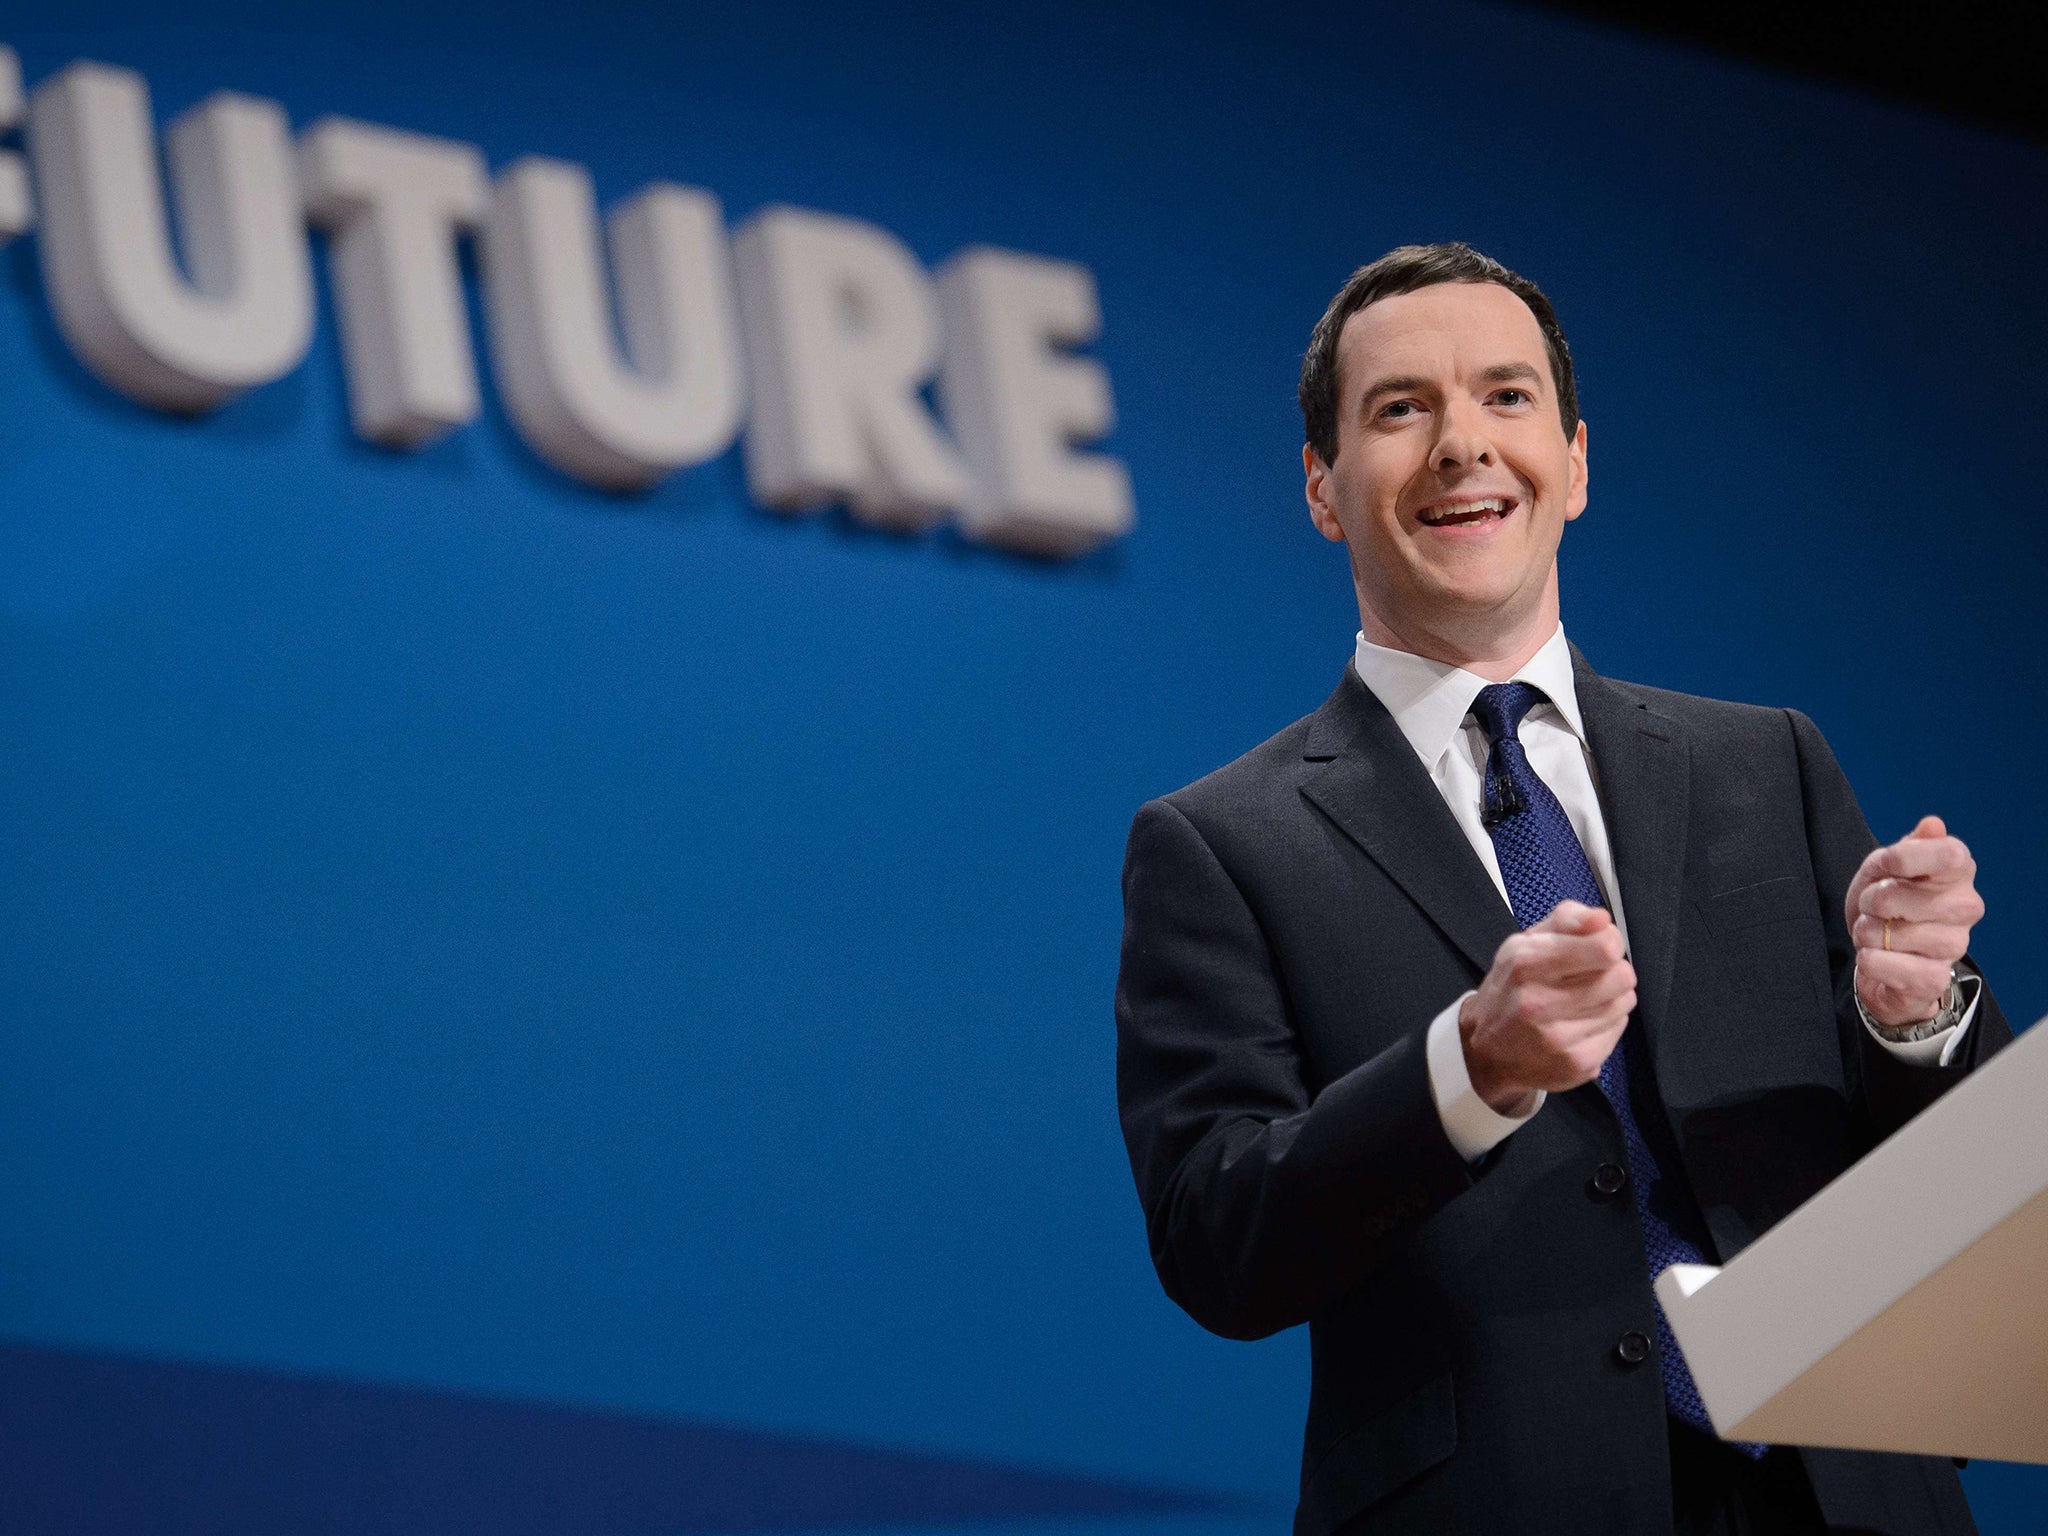 In his conference speech George Osborne claimed that Britain was the best-performing advanced economy